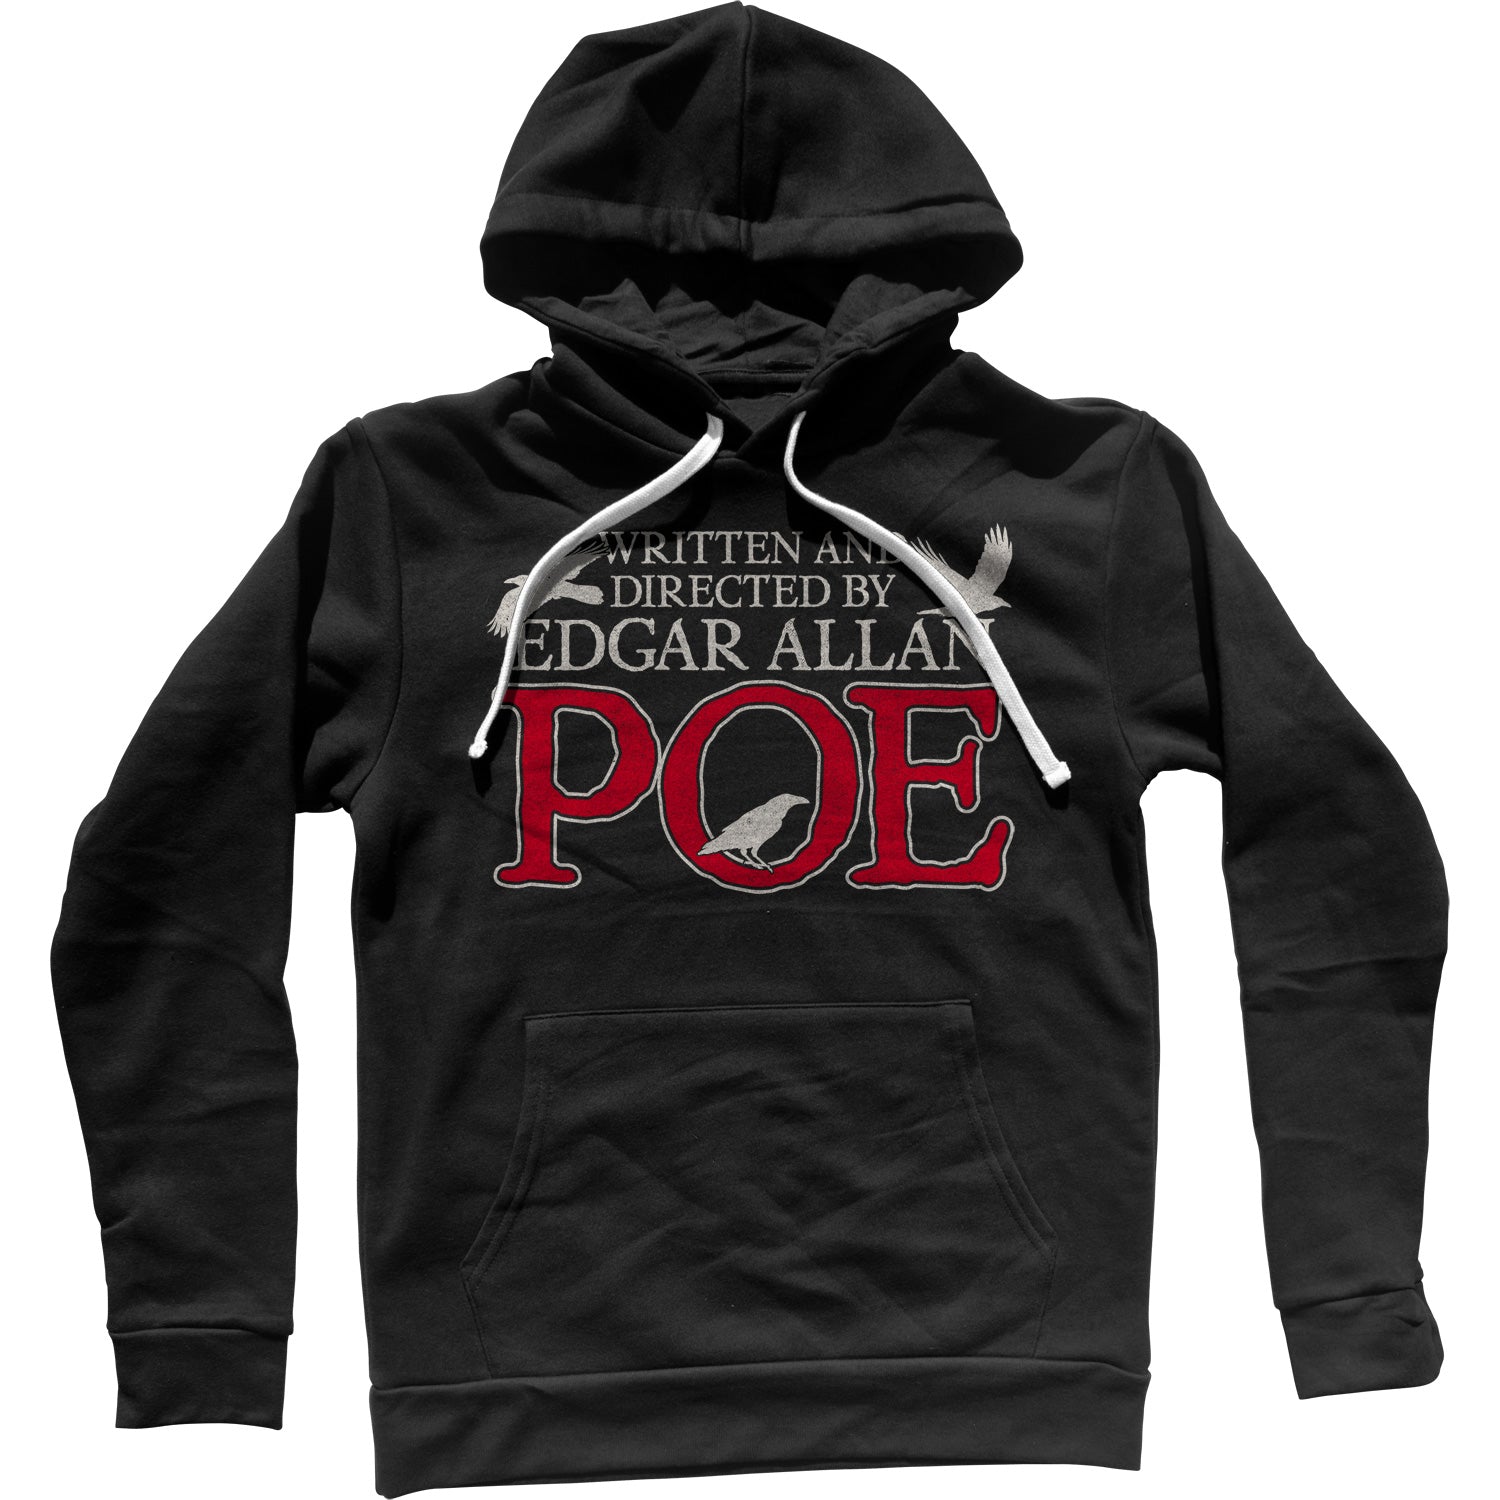 Written and Directed by Edgar Allan Poe Unisex Hoodie